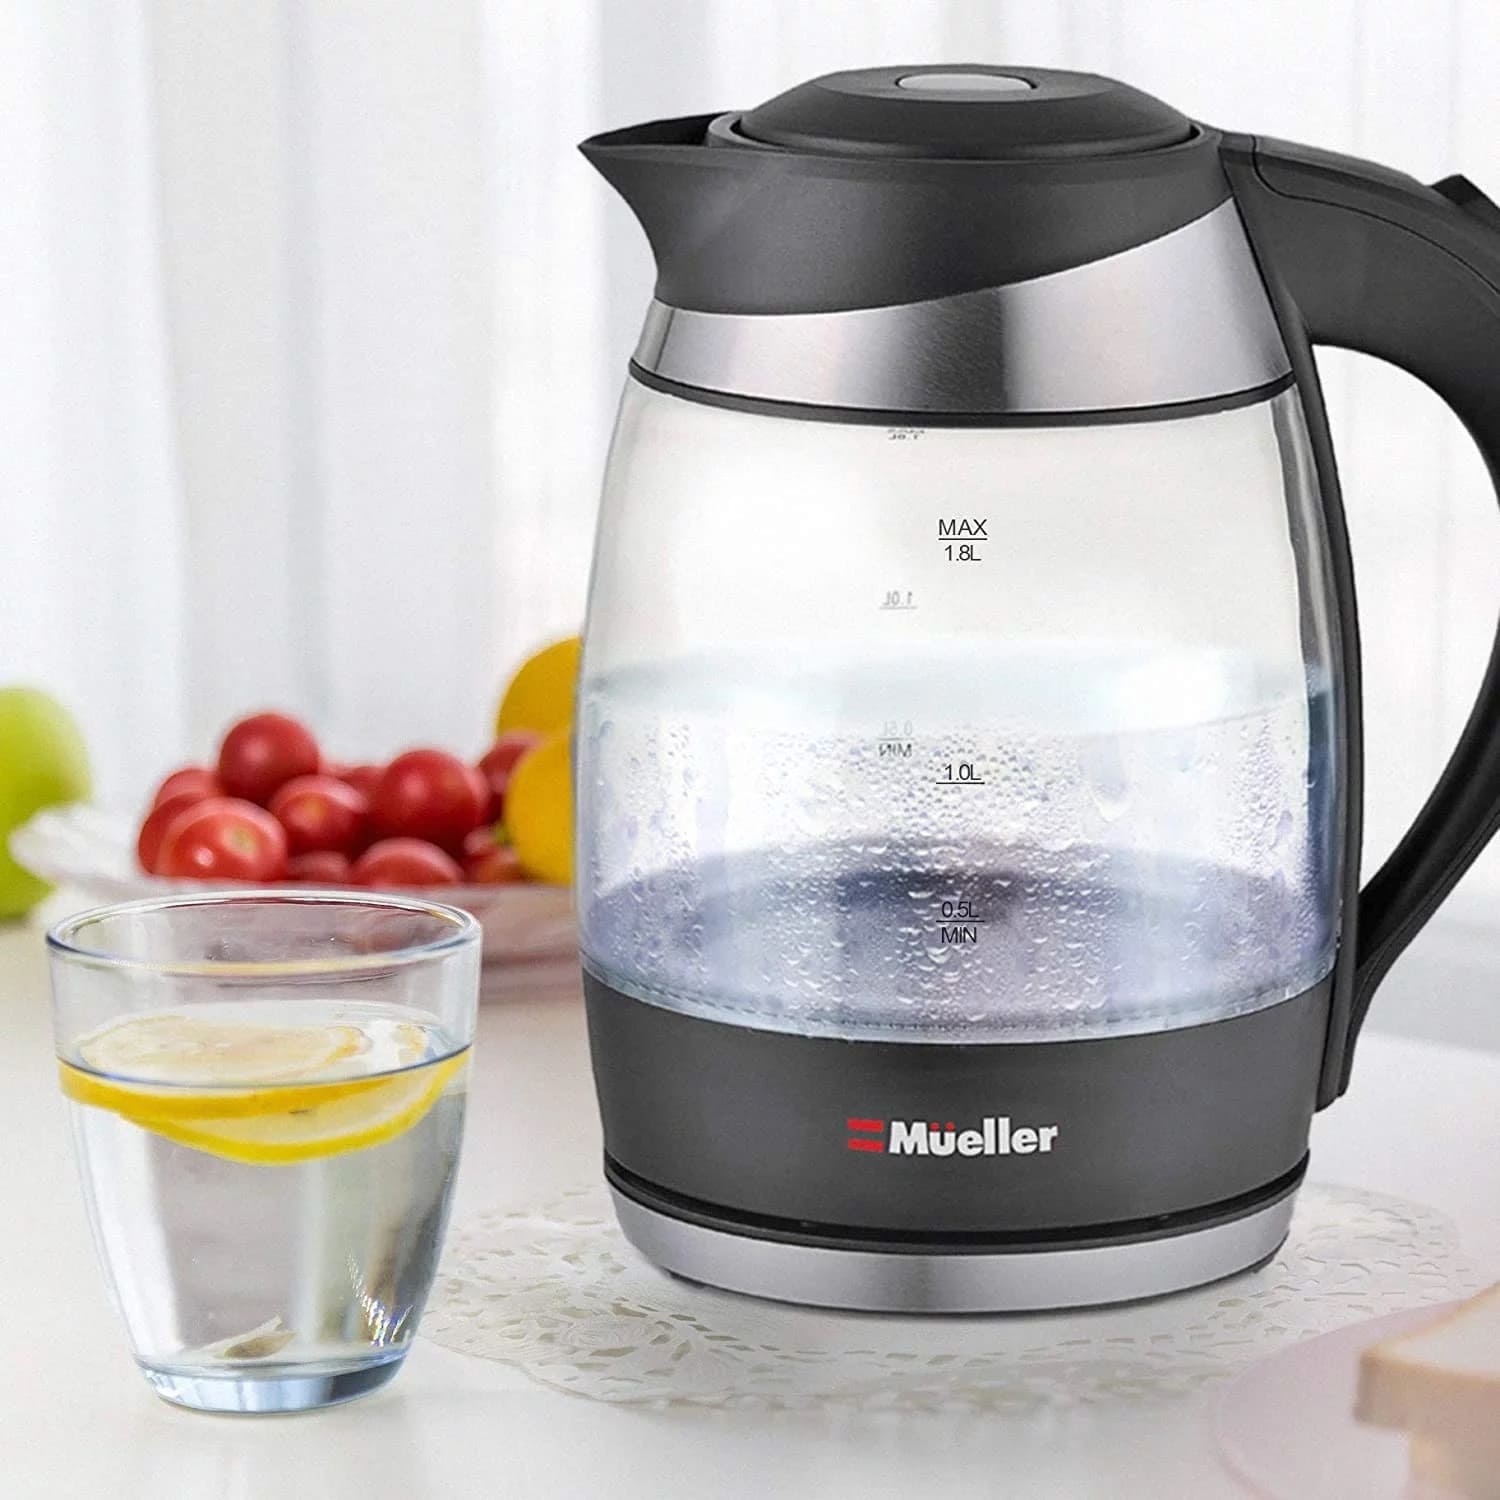 How To Clean A Mueller Electric Kettle